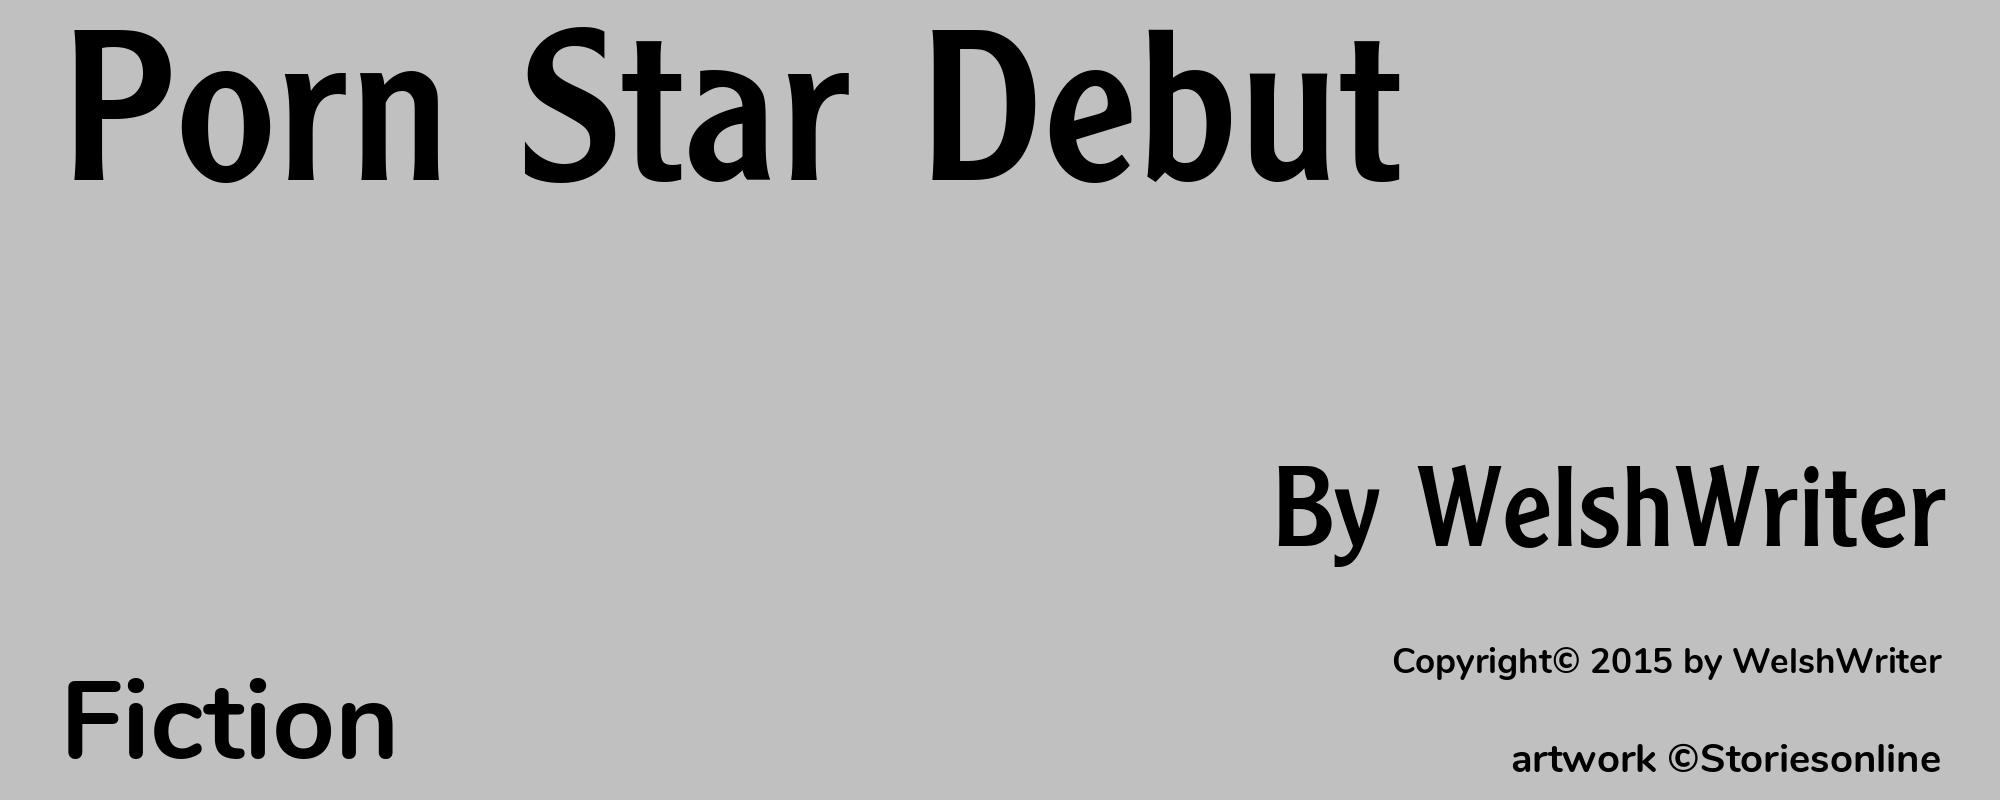 Porn Star Debut - Cover